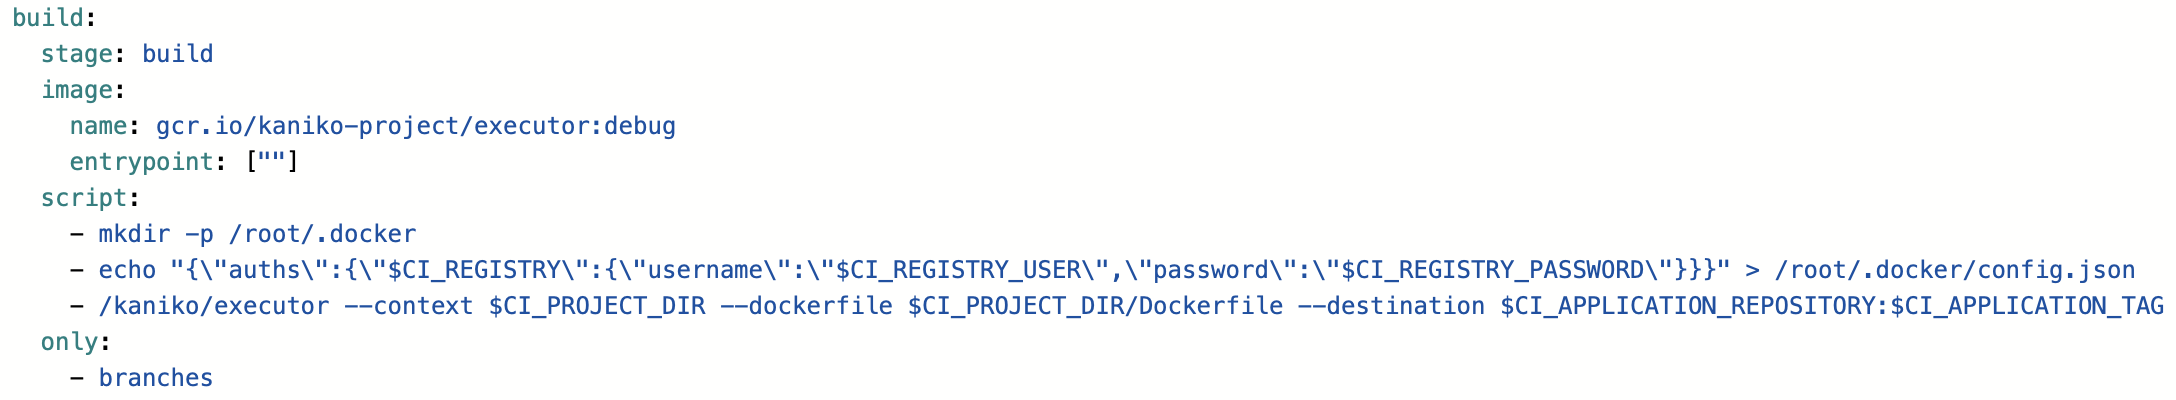 Securely build Docker images with kaniko